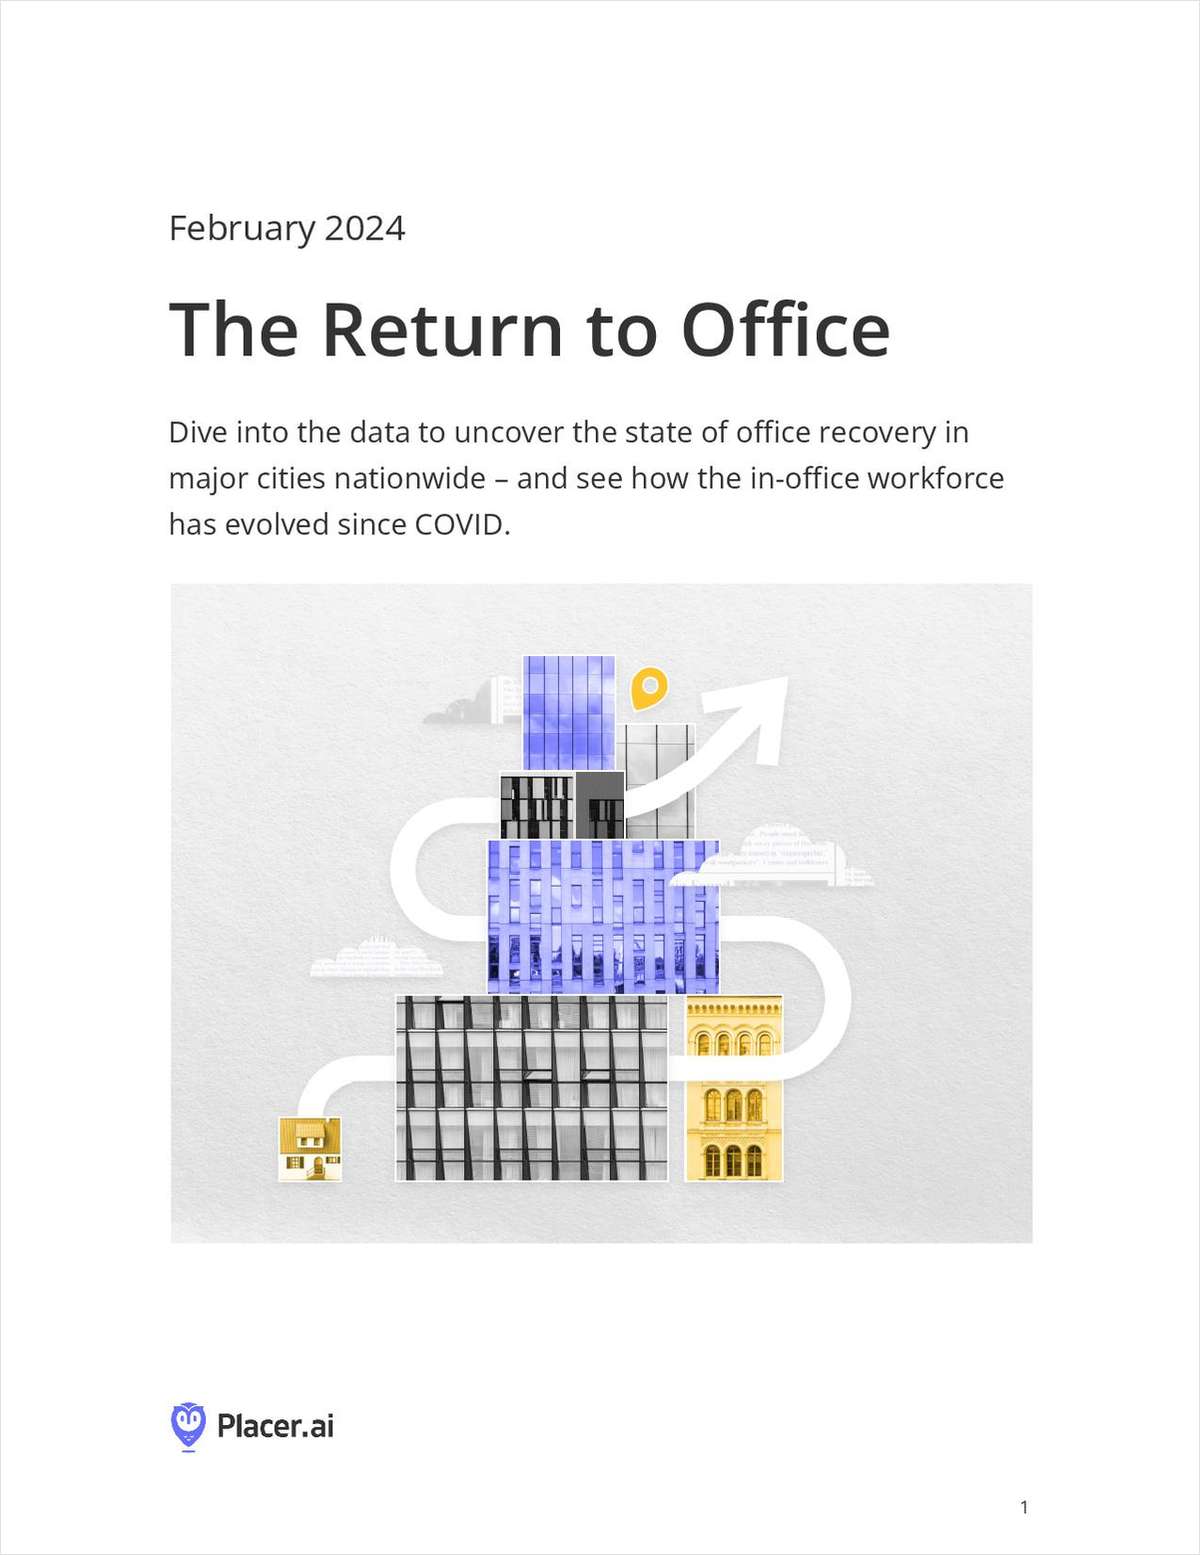 Office Recovery in Major Cities: Uncovering the State of Return to Office link